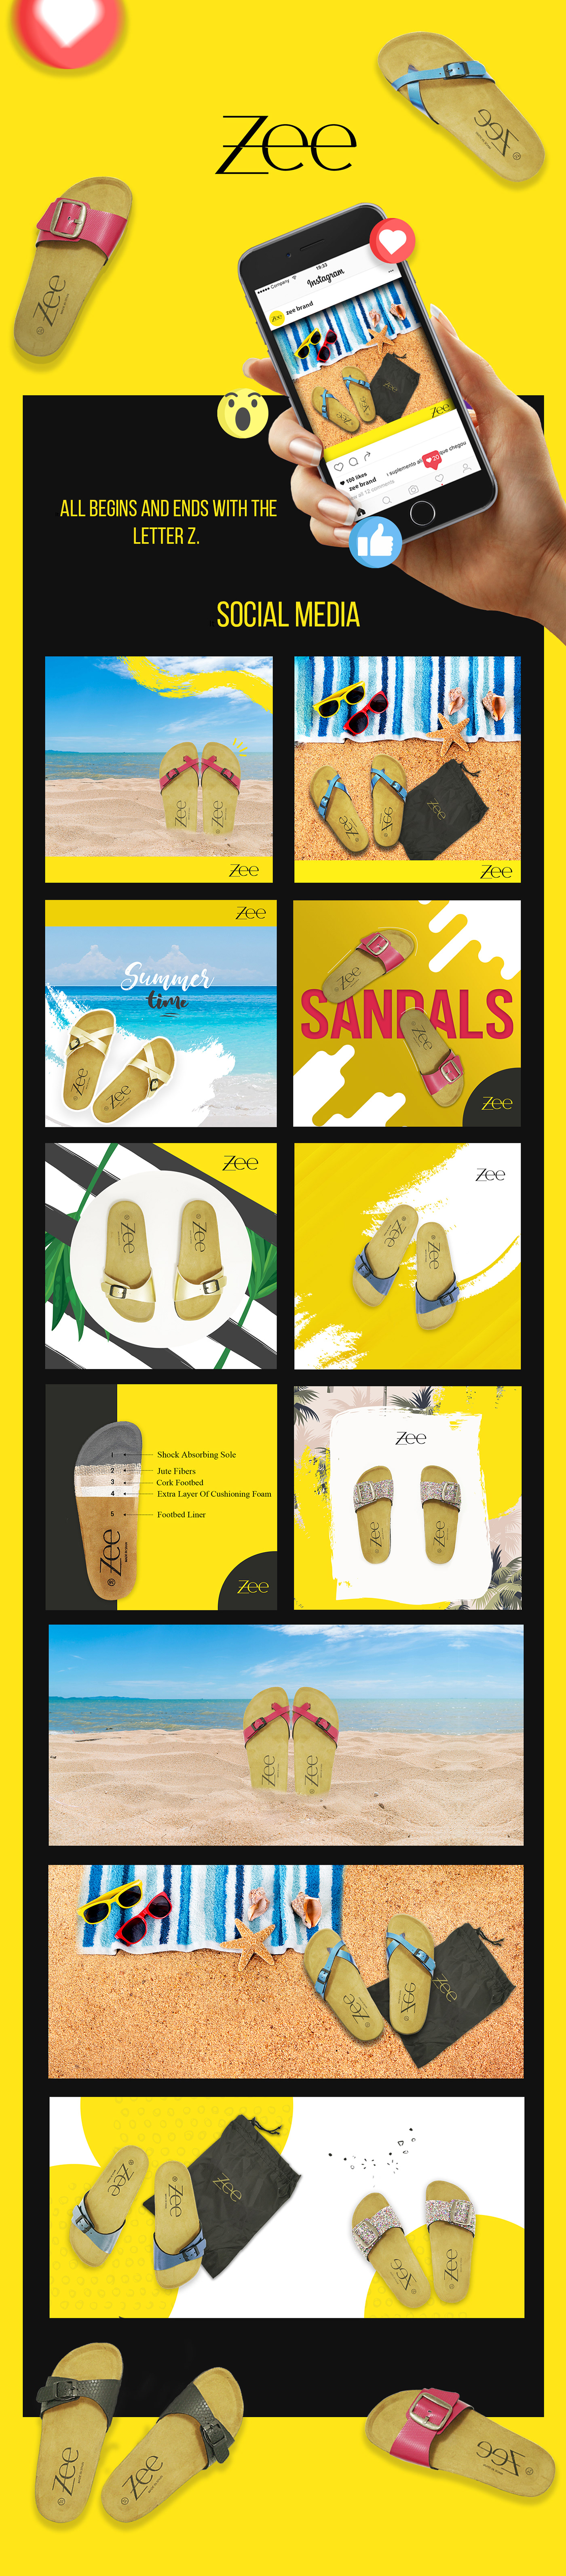 designs creative Sandals slippers yellow summer social media campaign